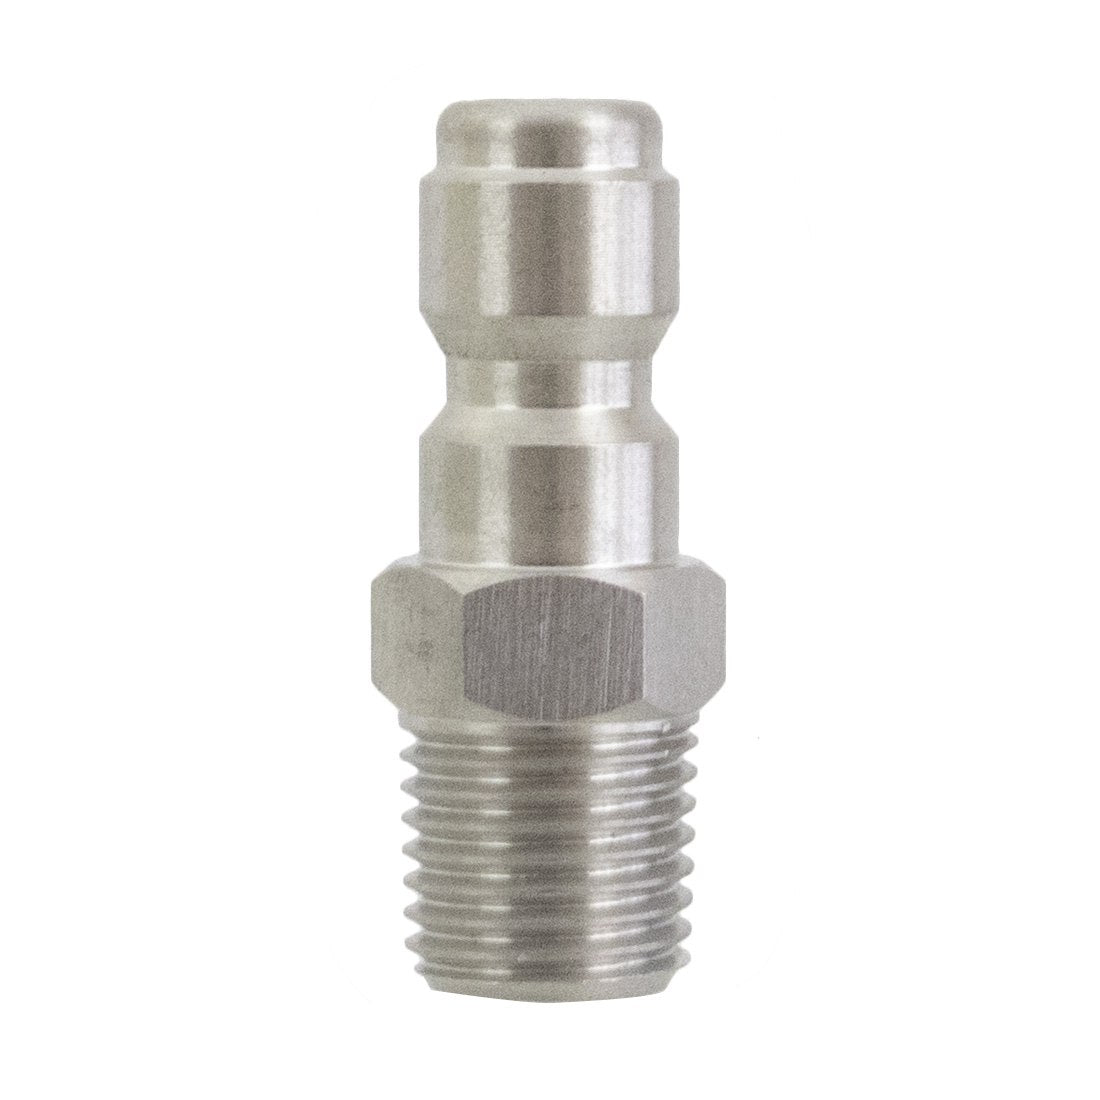 X-Jet Male Plug - 1/4 Inch - Upright Front View